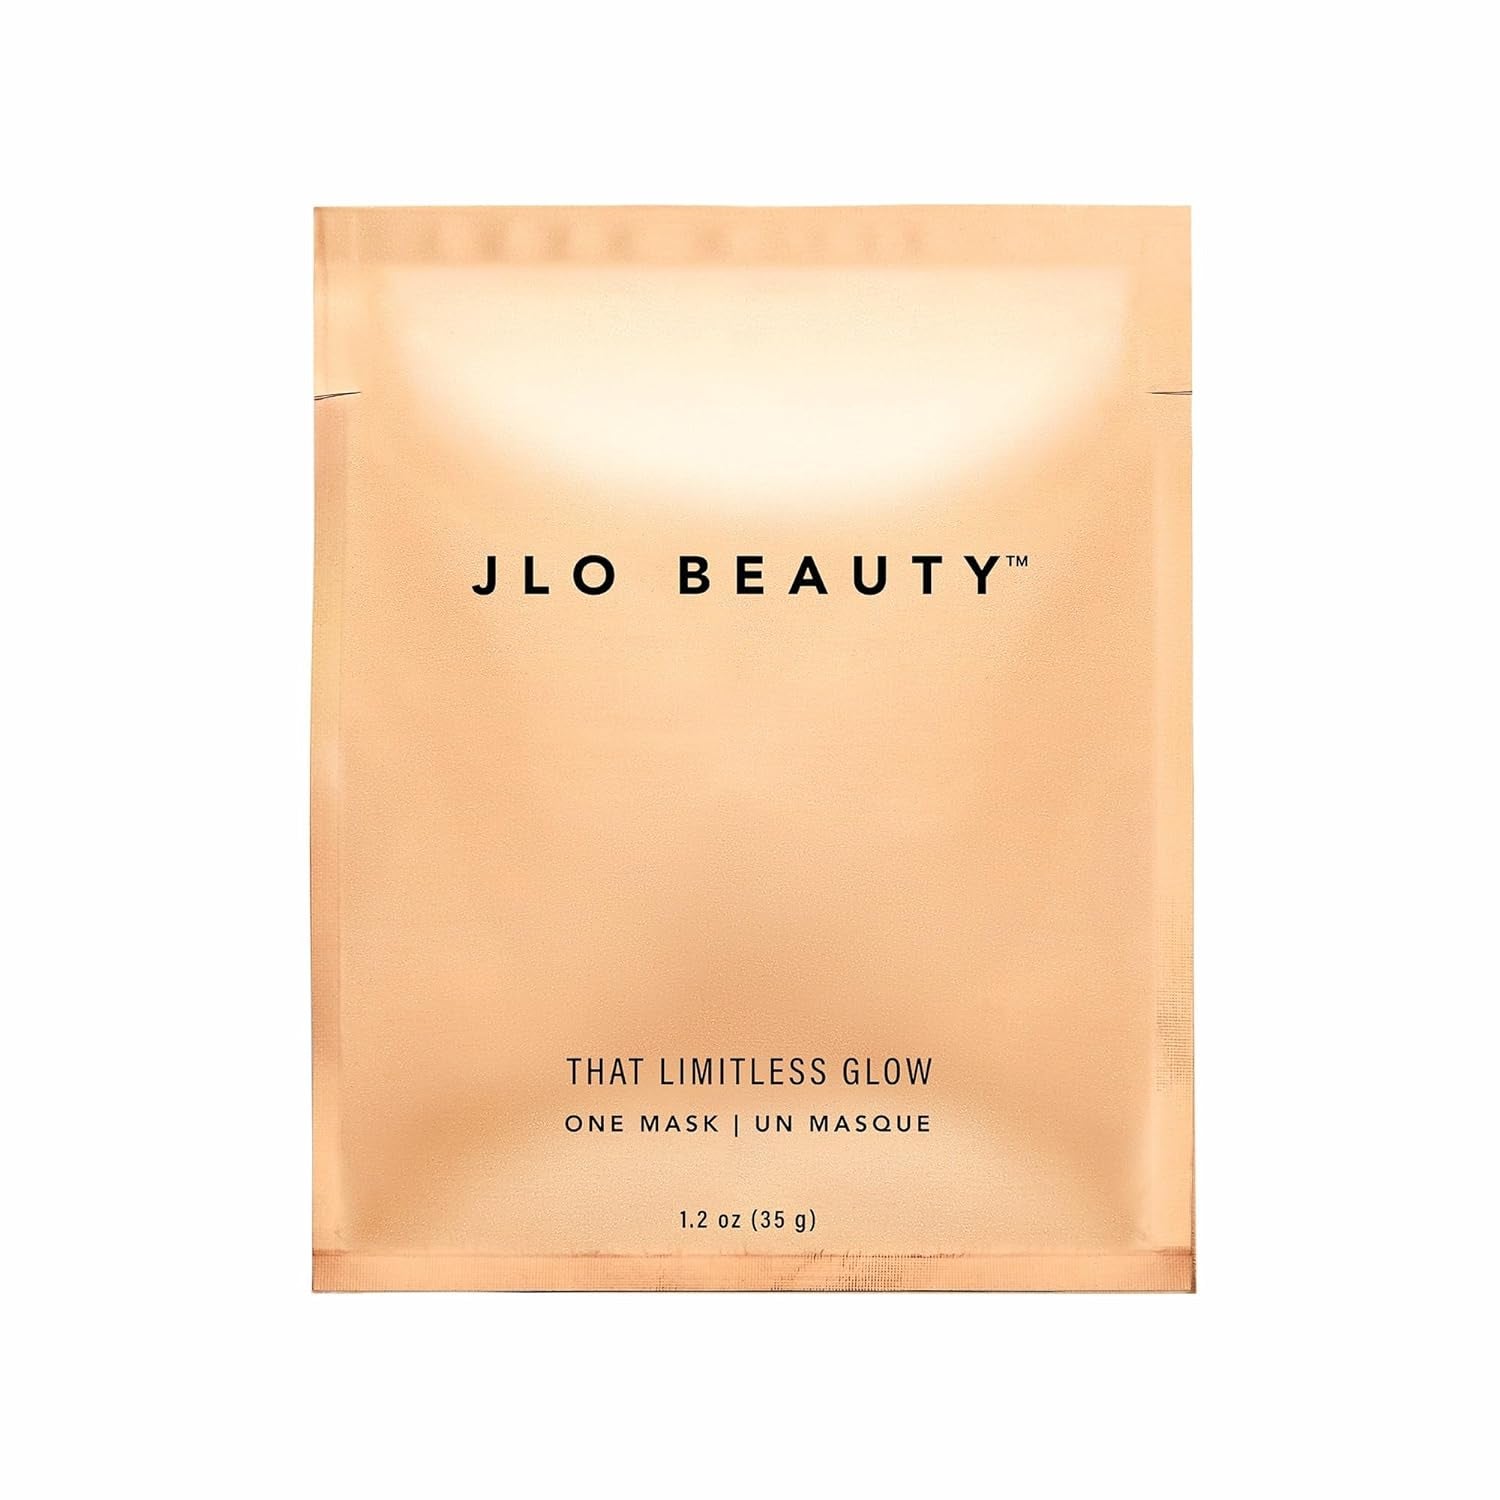 JLO BEAUTY That Limitless Glow Face Mask | Visibly Tightens, Lifts, Hydrates, Plumps, & Brightens for Glowy Skin, Infused with Jlo Glow Serum